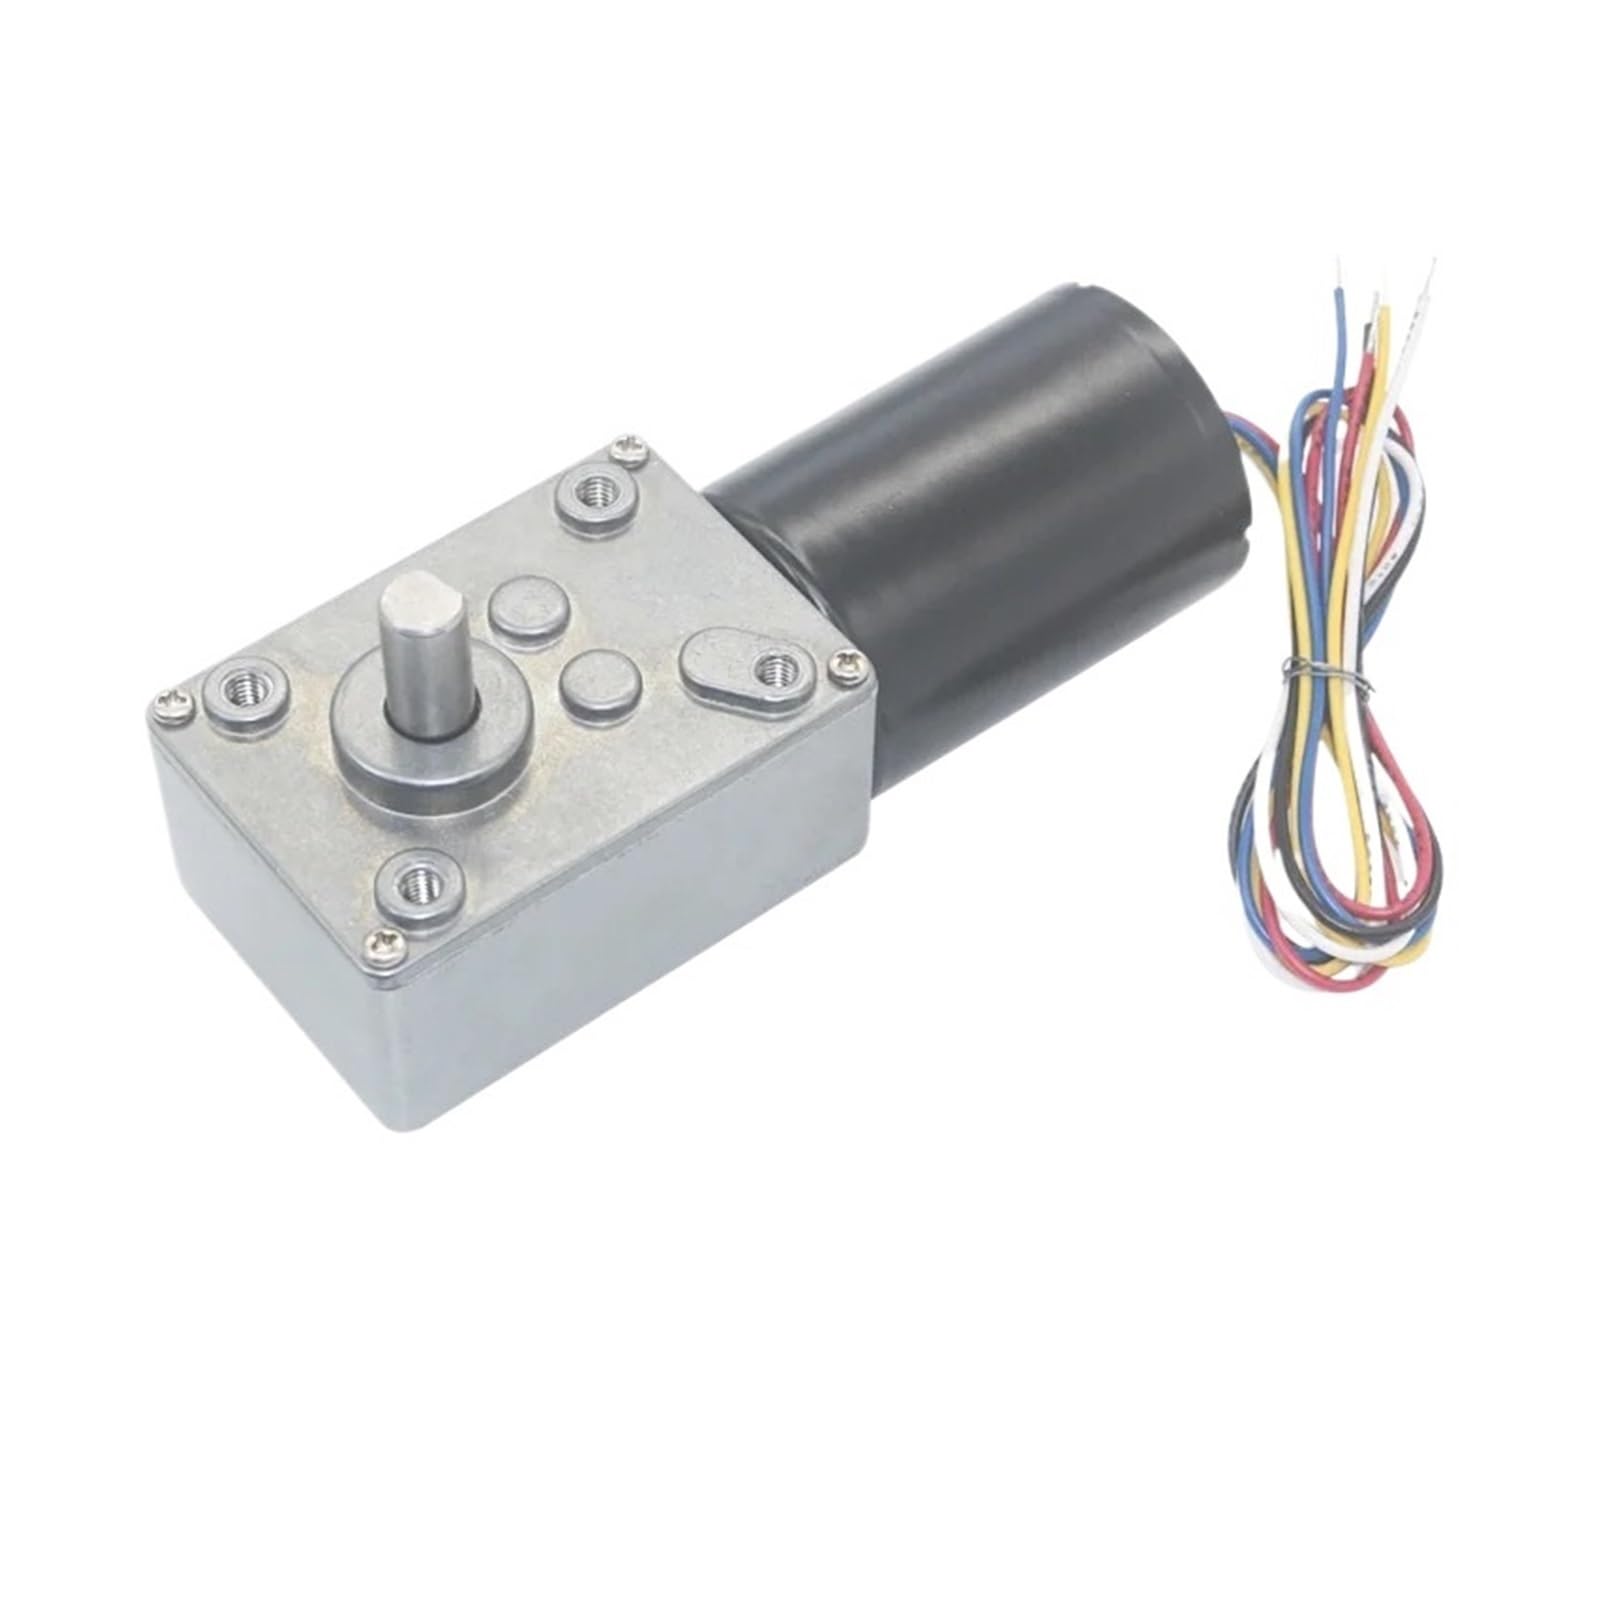 5840-3650 DC brushless gear electronic starter, large torque, long life, low noise, signal feedback can be forward and reverse DC12V 24V IDGTTLDF(80,24V) von IDGTTLDF